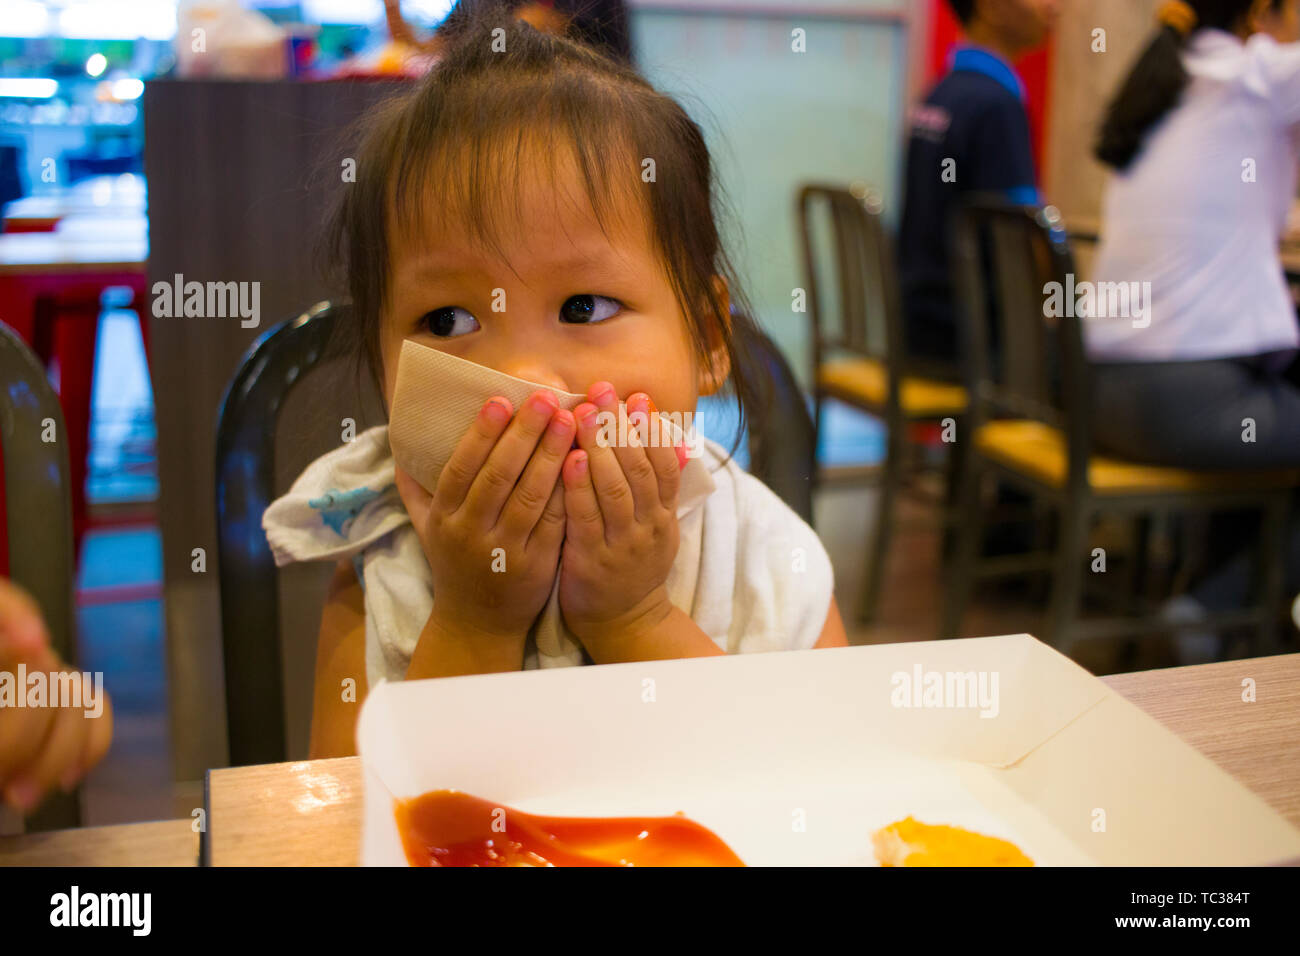 CHIANGMAI,THAILAND-MAY 3,2019 : Little Child eating fried chicken in the background of KFC restaurant. Stock Photo